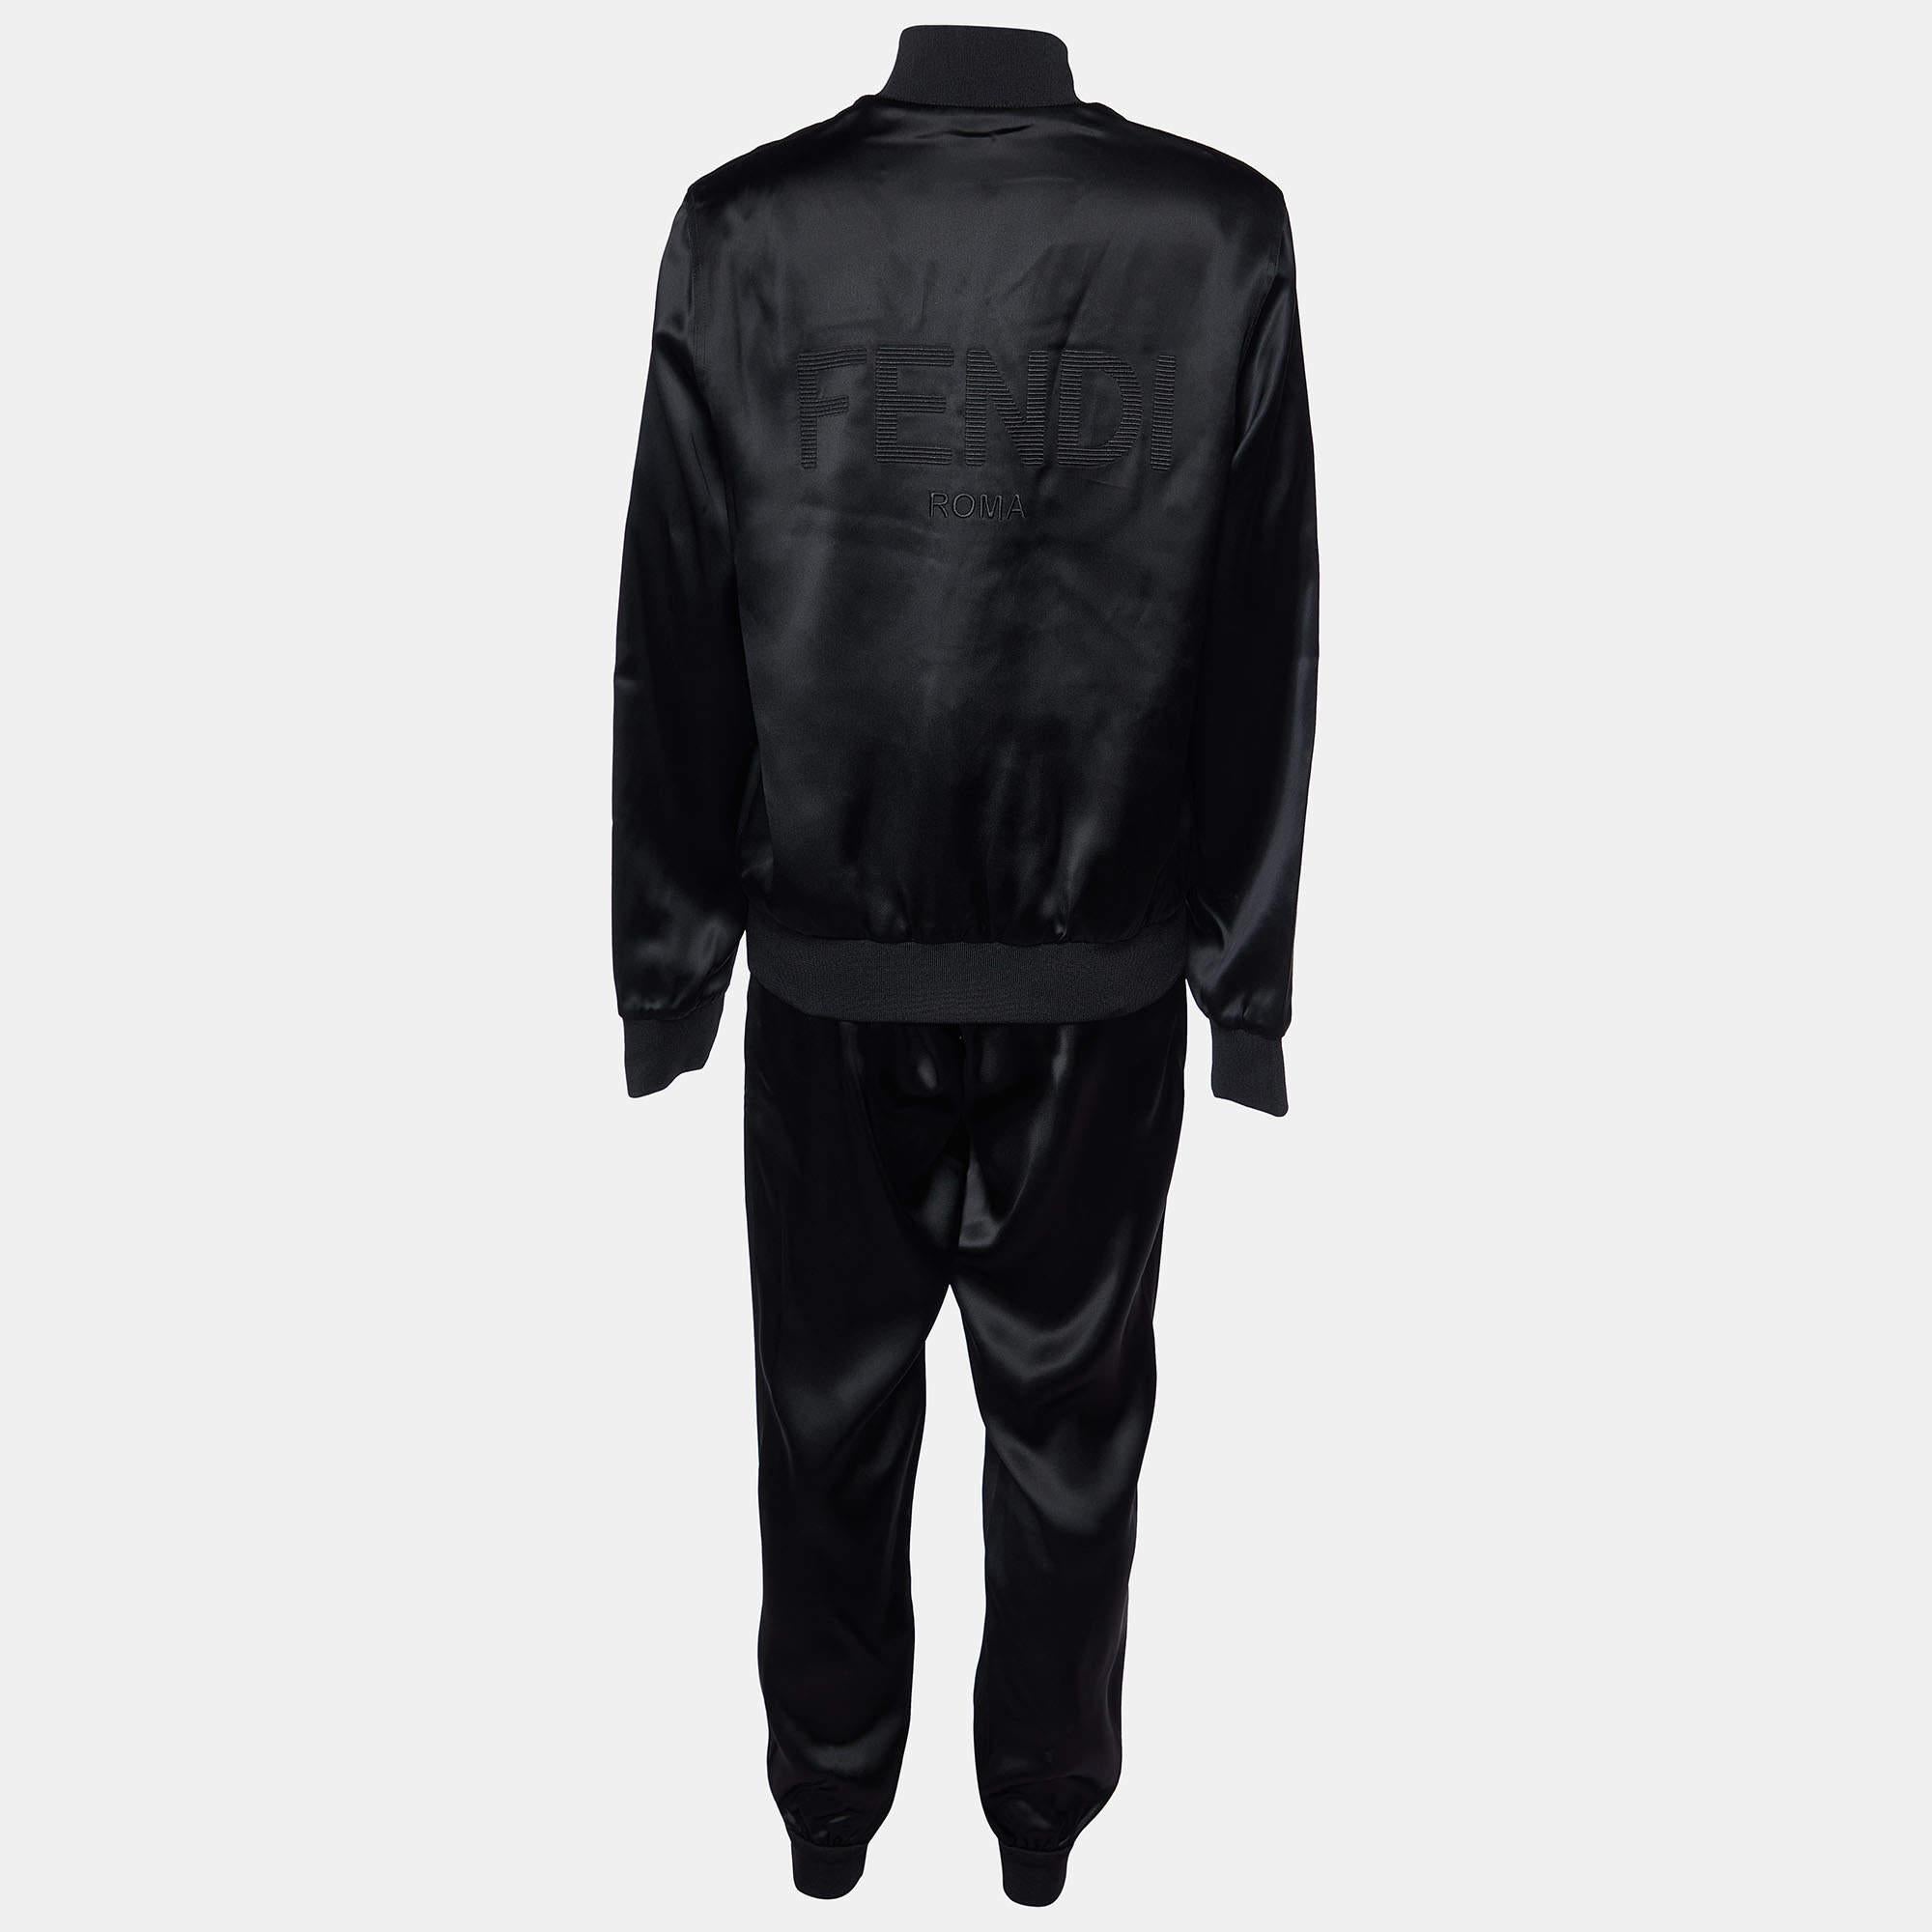 Infuse an extra dose of style into your outfit with this highly fashionable track suit. Tailored from quality materials, it embodies a contemporary vibe and is filled with functional characteristics.

Includes: Original Dustbag, Price Tag